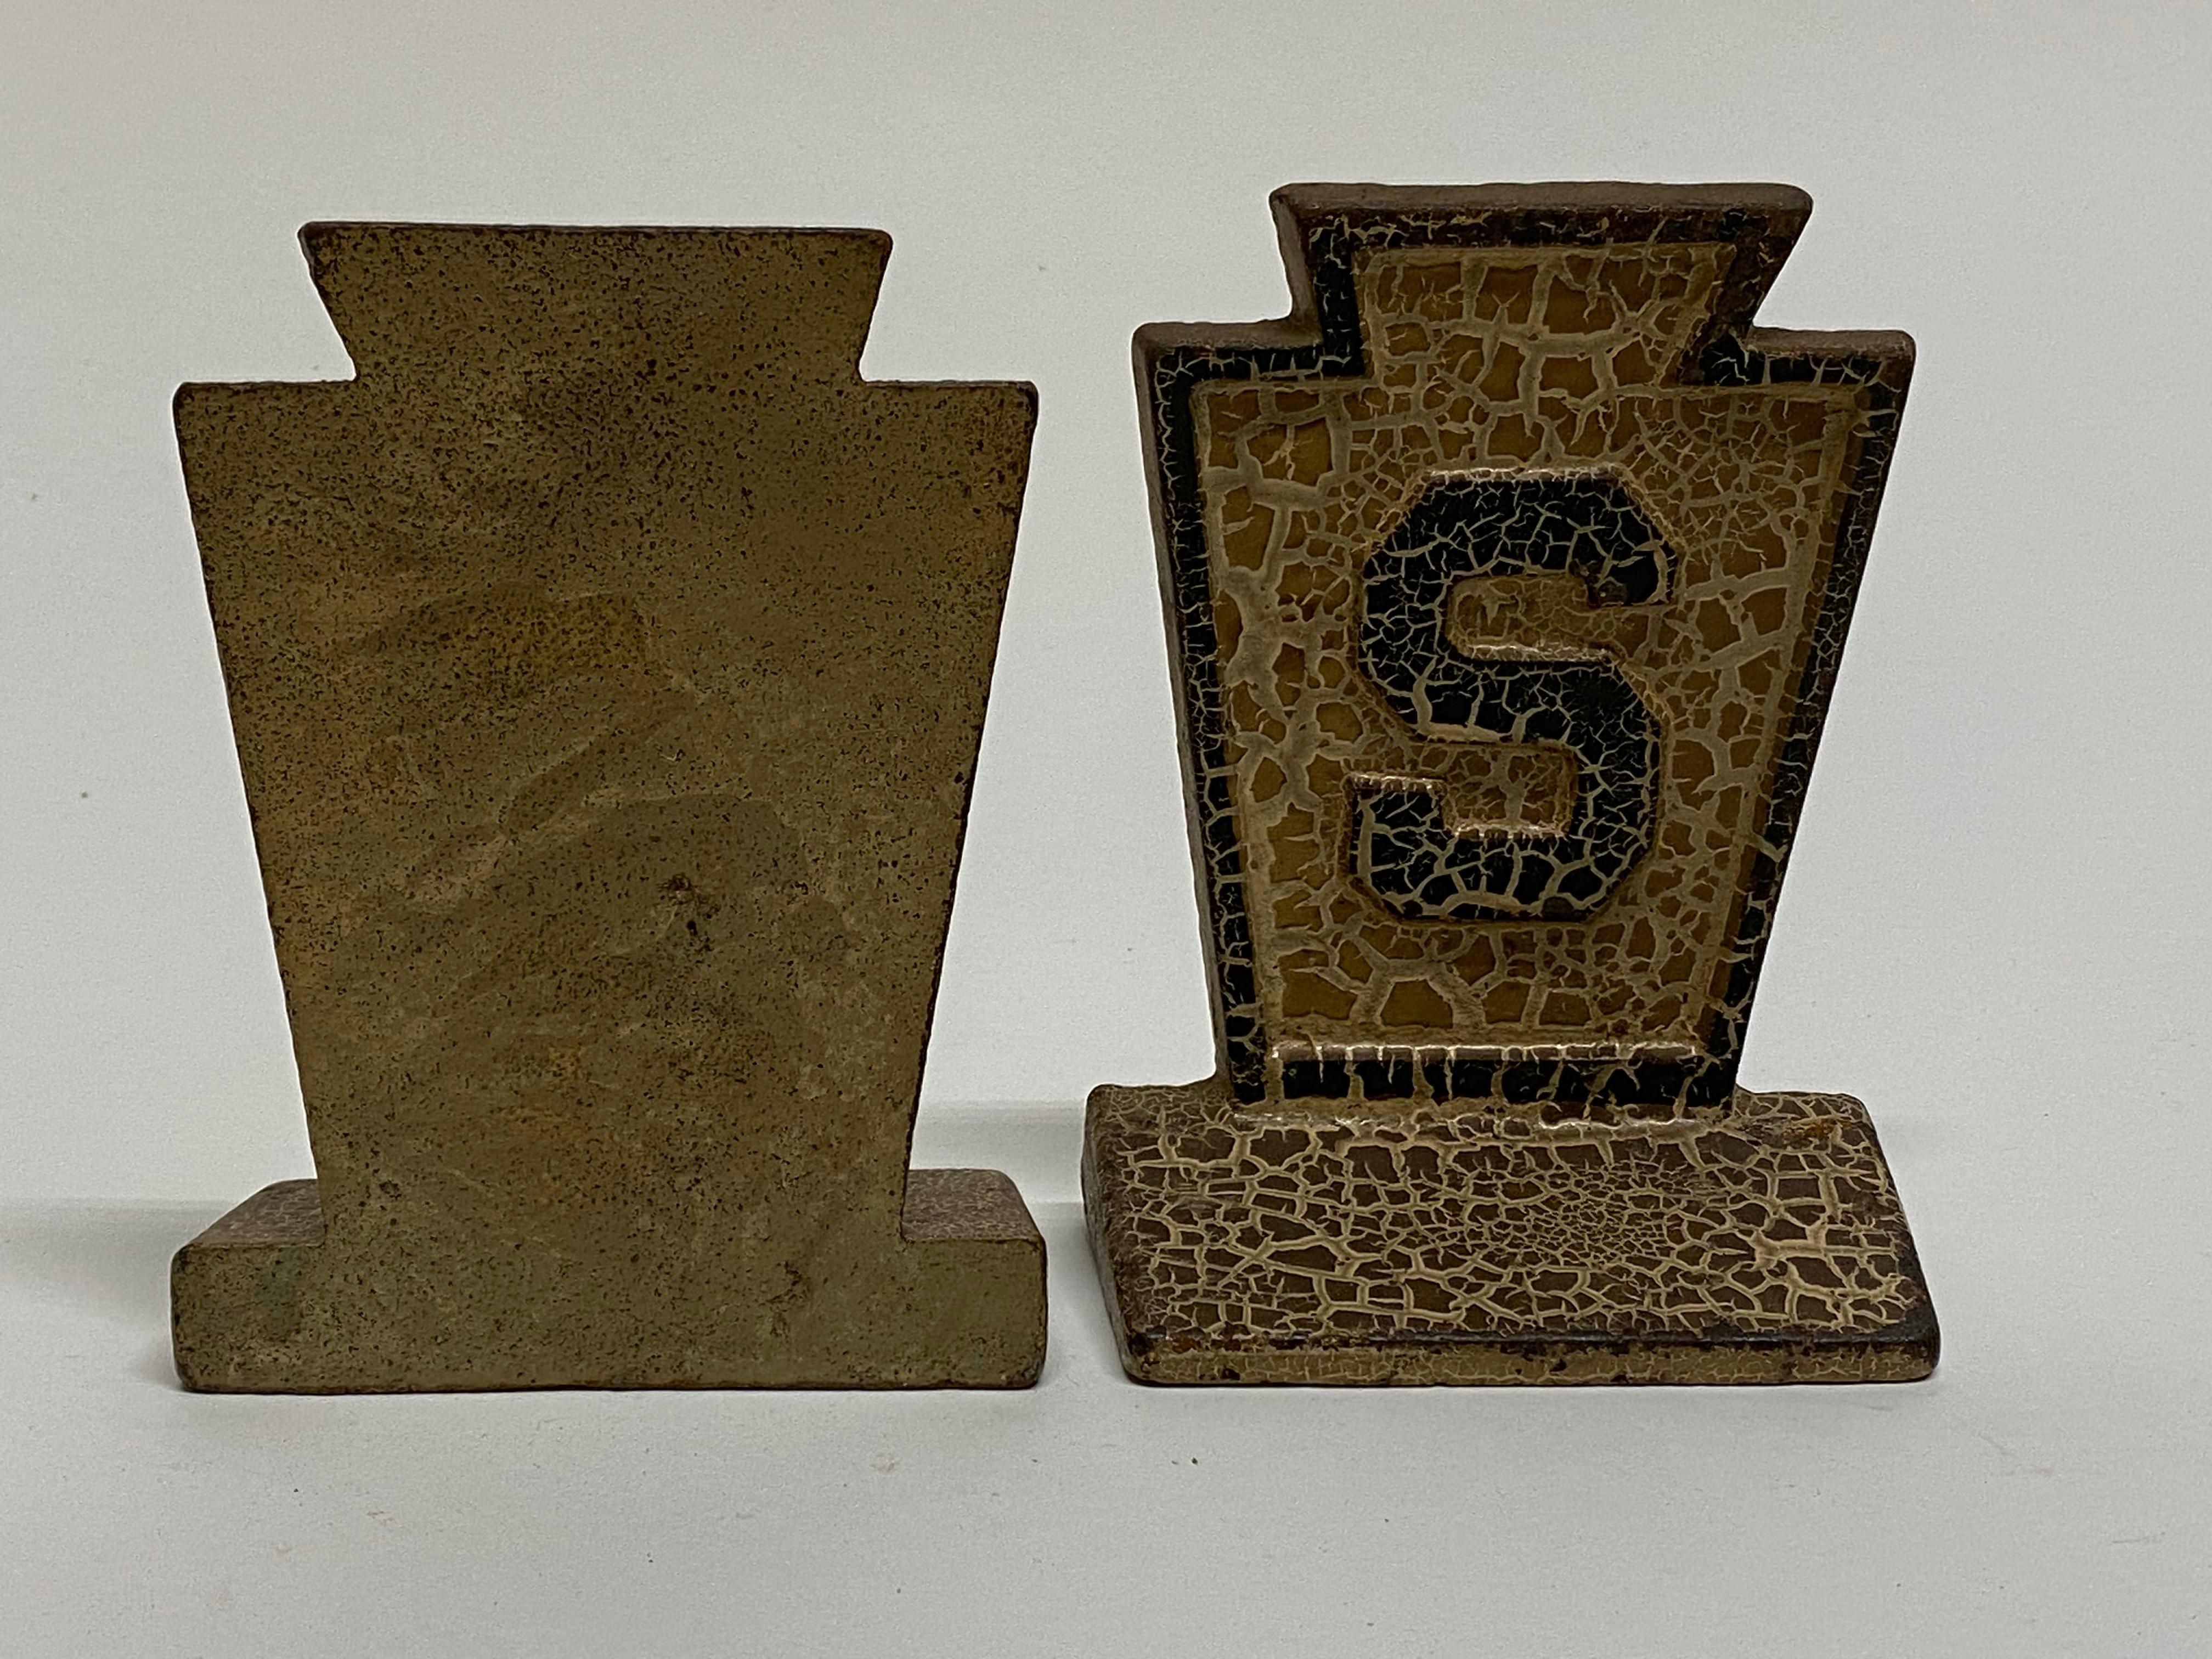 A nice pair of cast iron bookends with great patina, surface, and texture. The bookends are a keystone shape with a raised letter 'S', circa 1920-30. A good looking set that would compliment any library, desk, office or anywhere in the home. Good